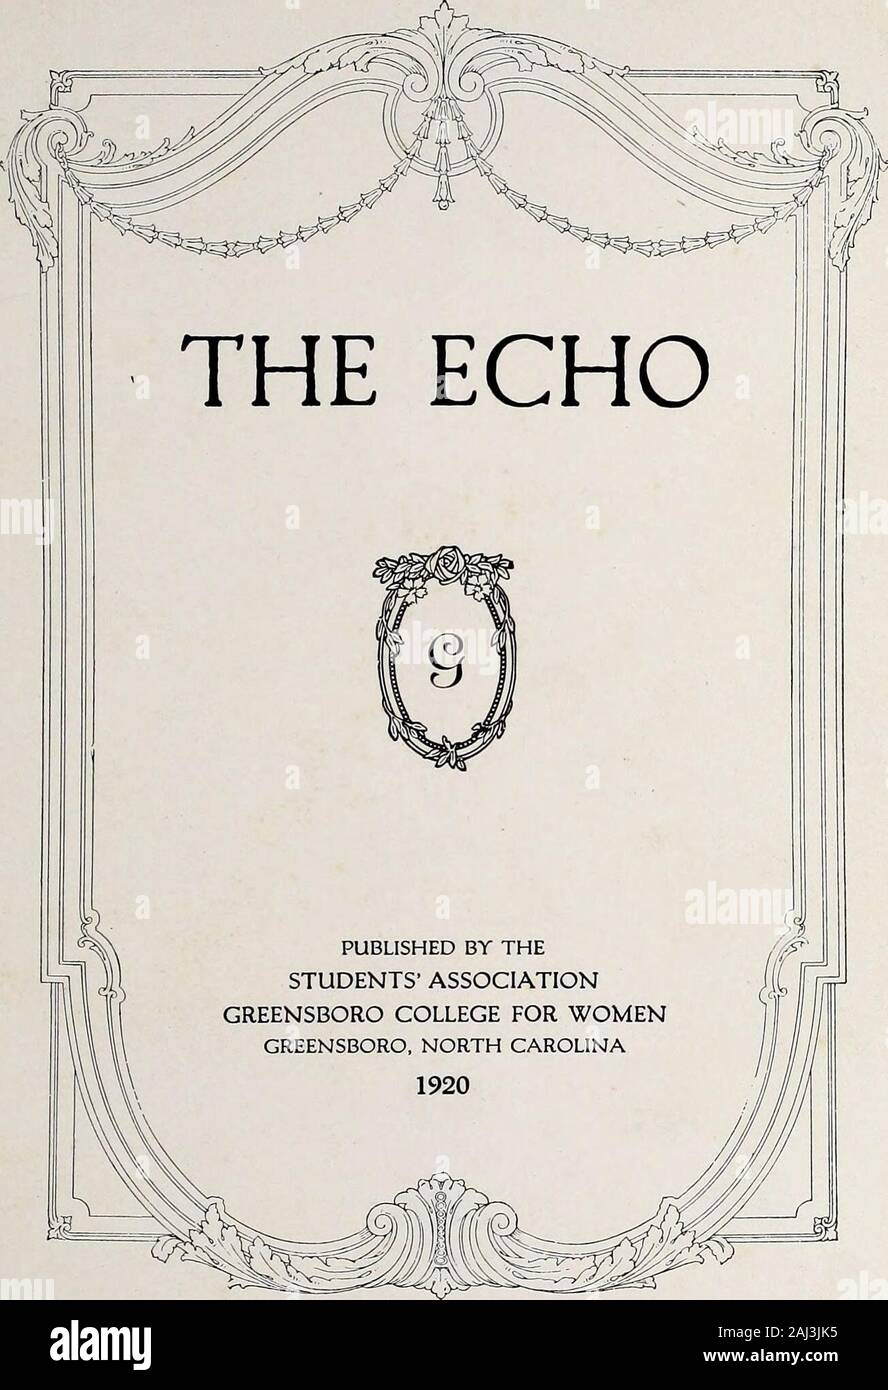 Echo . ORDER OF BOOKS? Book One THE COLLEGE Book Two THE CLASSES Book Three ORGANIZATIONS Book Four ATHLETICS Book Five THE COLLEGE YEAR Book Six PUBLICATIONSHUMOR FOREWORD =?— - r==gg5f ?-?—= Some serious thought andmuch real fun have gone intothe work of preparing thishook. We realize that it yethas to go through the perils ofcensorship, and not on ac-count of it, hut in spite of it,we now launch it on the Seaof Public Opinion. We hopethat it may withstand alladverse criticism, and anchorsafely in the Harbor of YourFavor. And may this Echore-echo through the yearswhich may come and awakenin Stock Photo